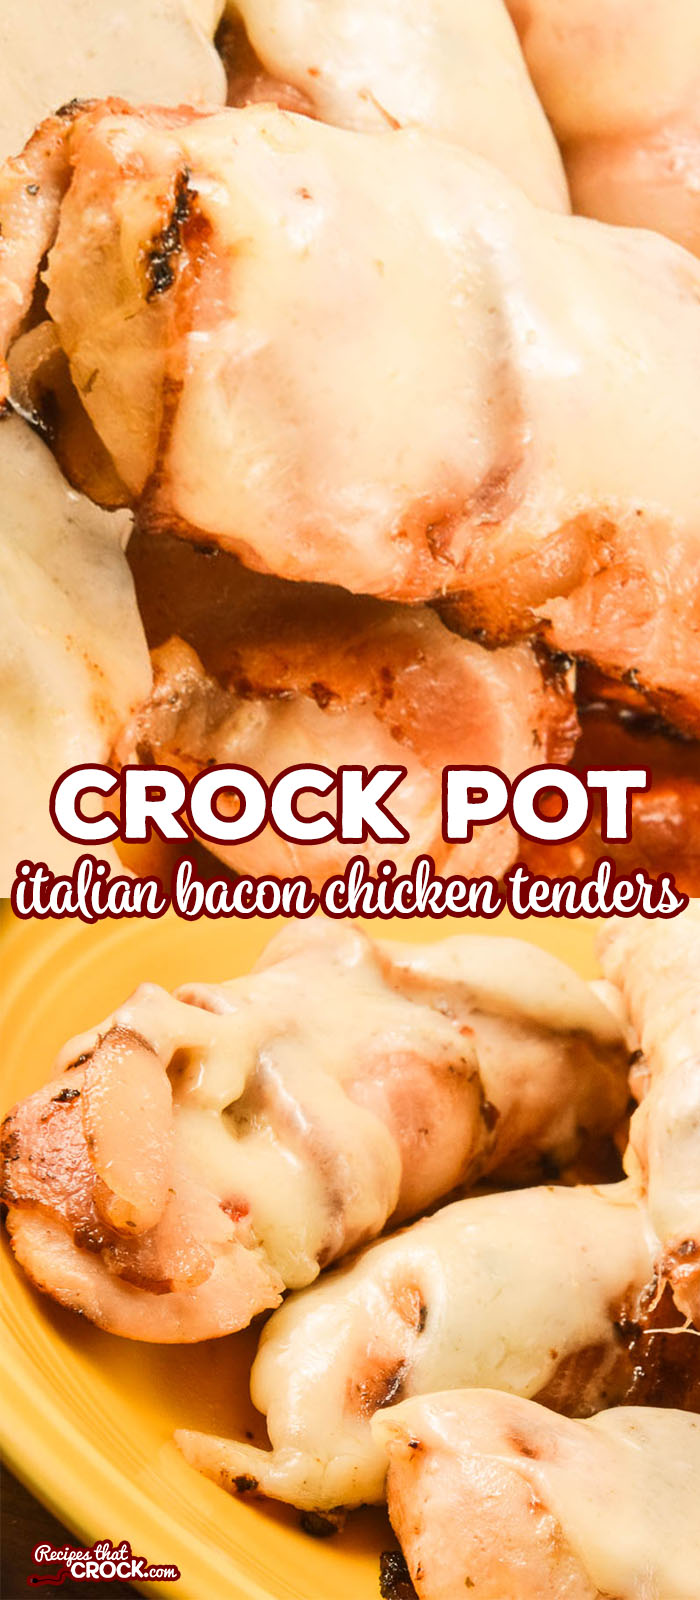 Are you looking for an easy crock pot chicken dish that makes a great family dinner or party appetizer? These Crock Pot Italian Bacon Chicken Tenders are so simple and delicious to make!